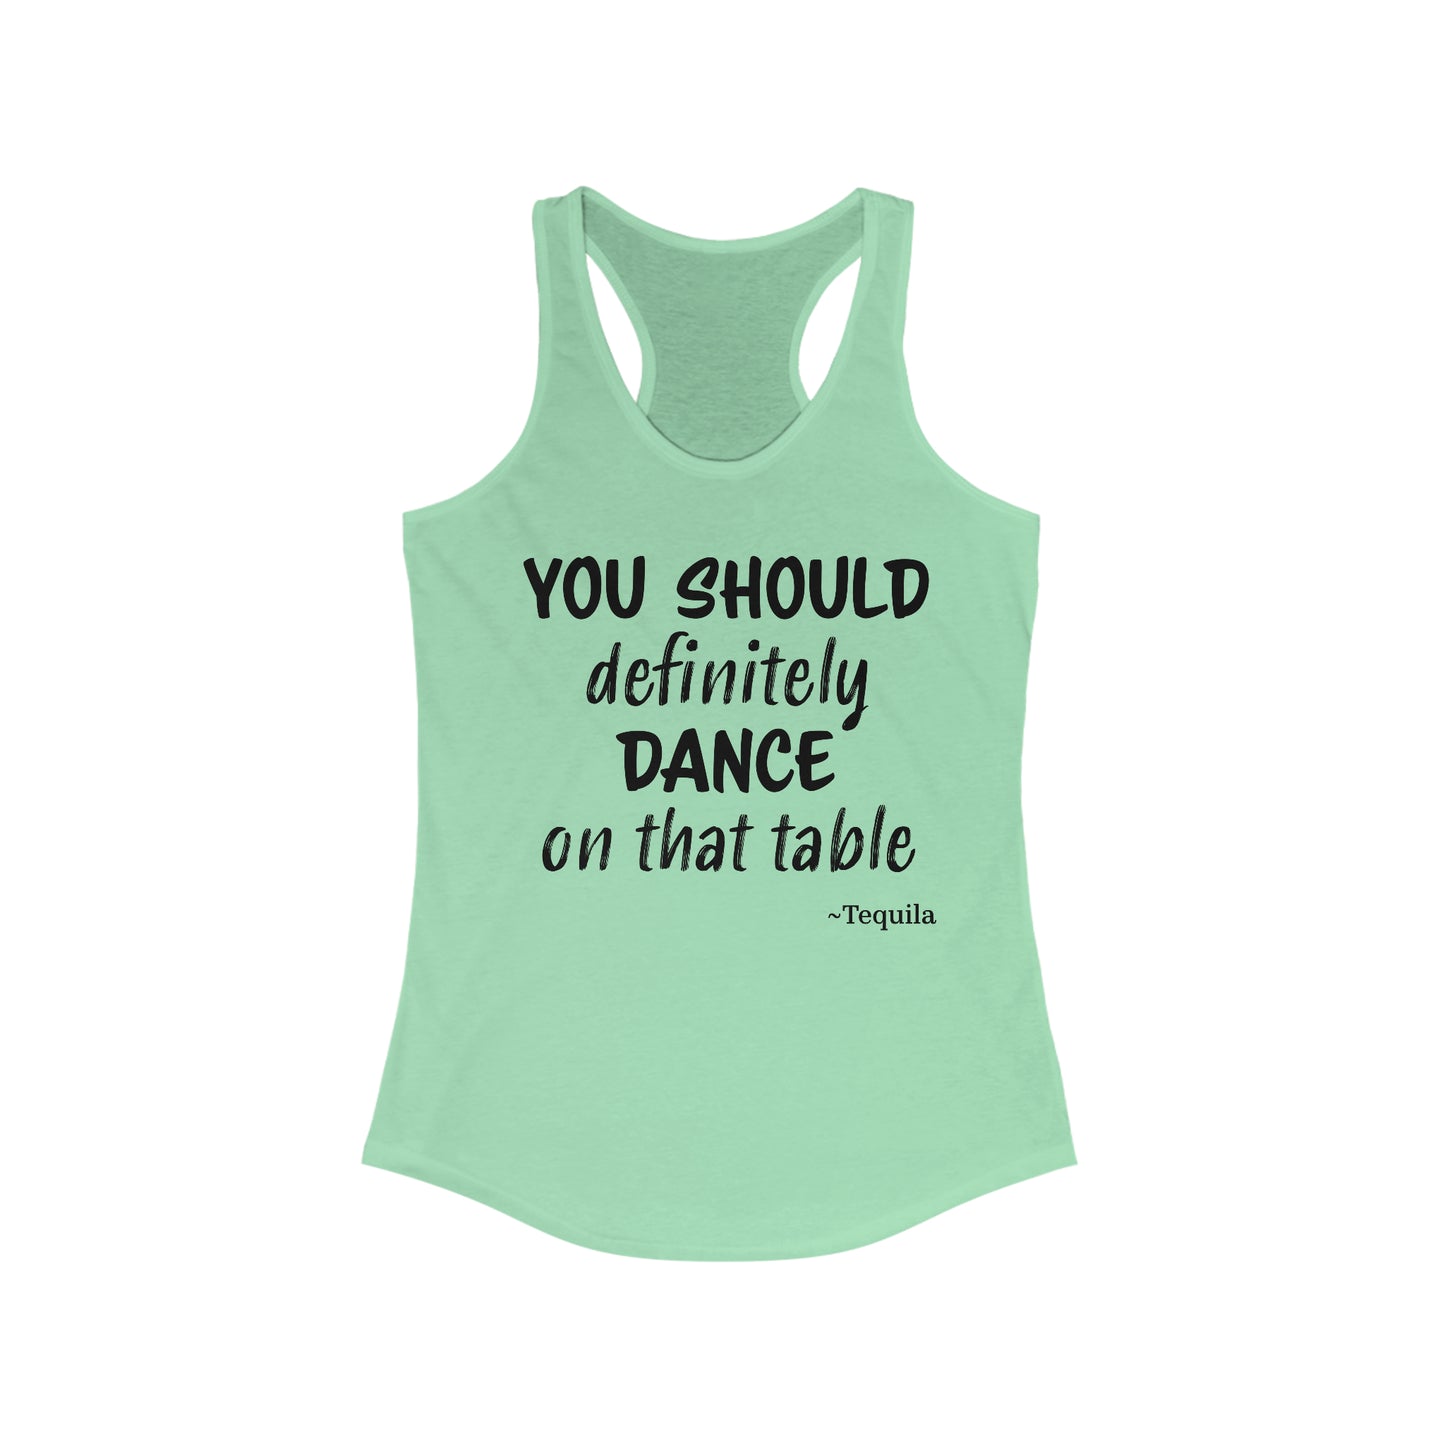 Tequila Tank Top For Dancing On Tables Tank Top For Party Time Tank Top For Girls Trip Shirt For Drinking